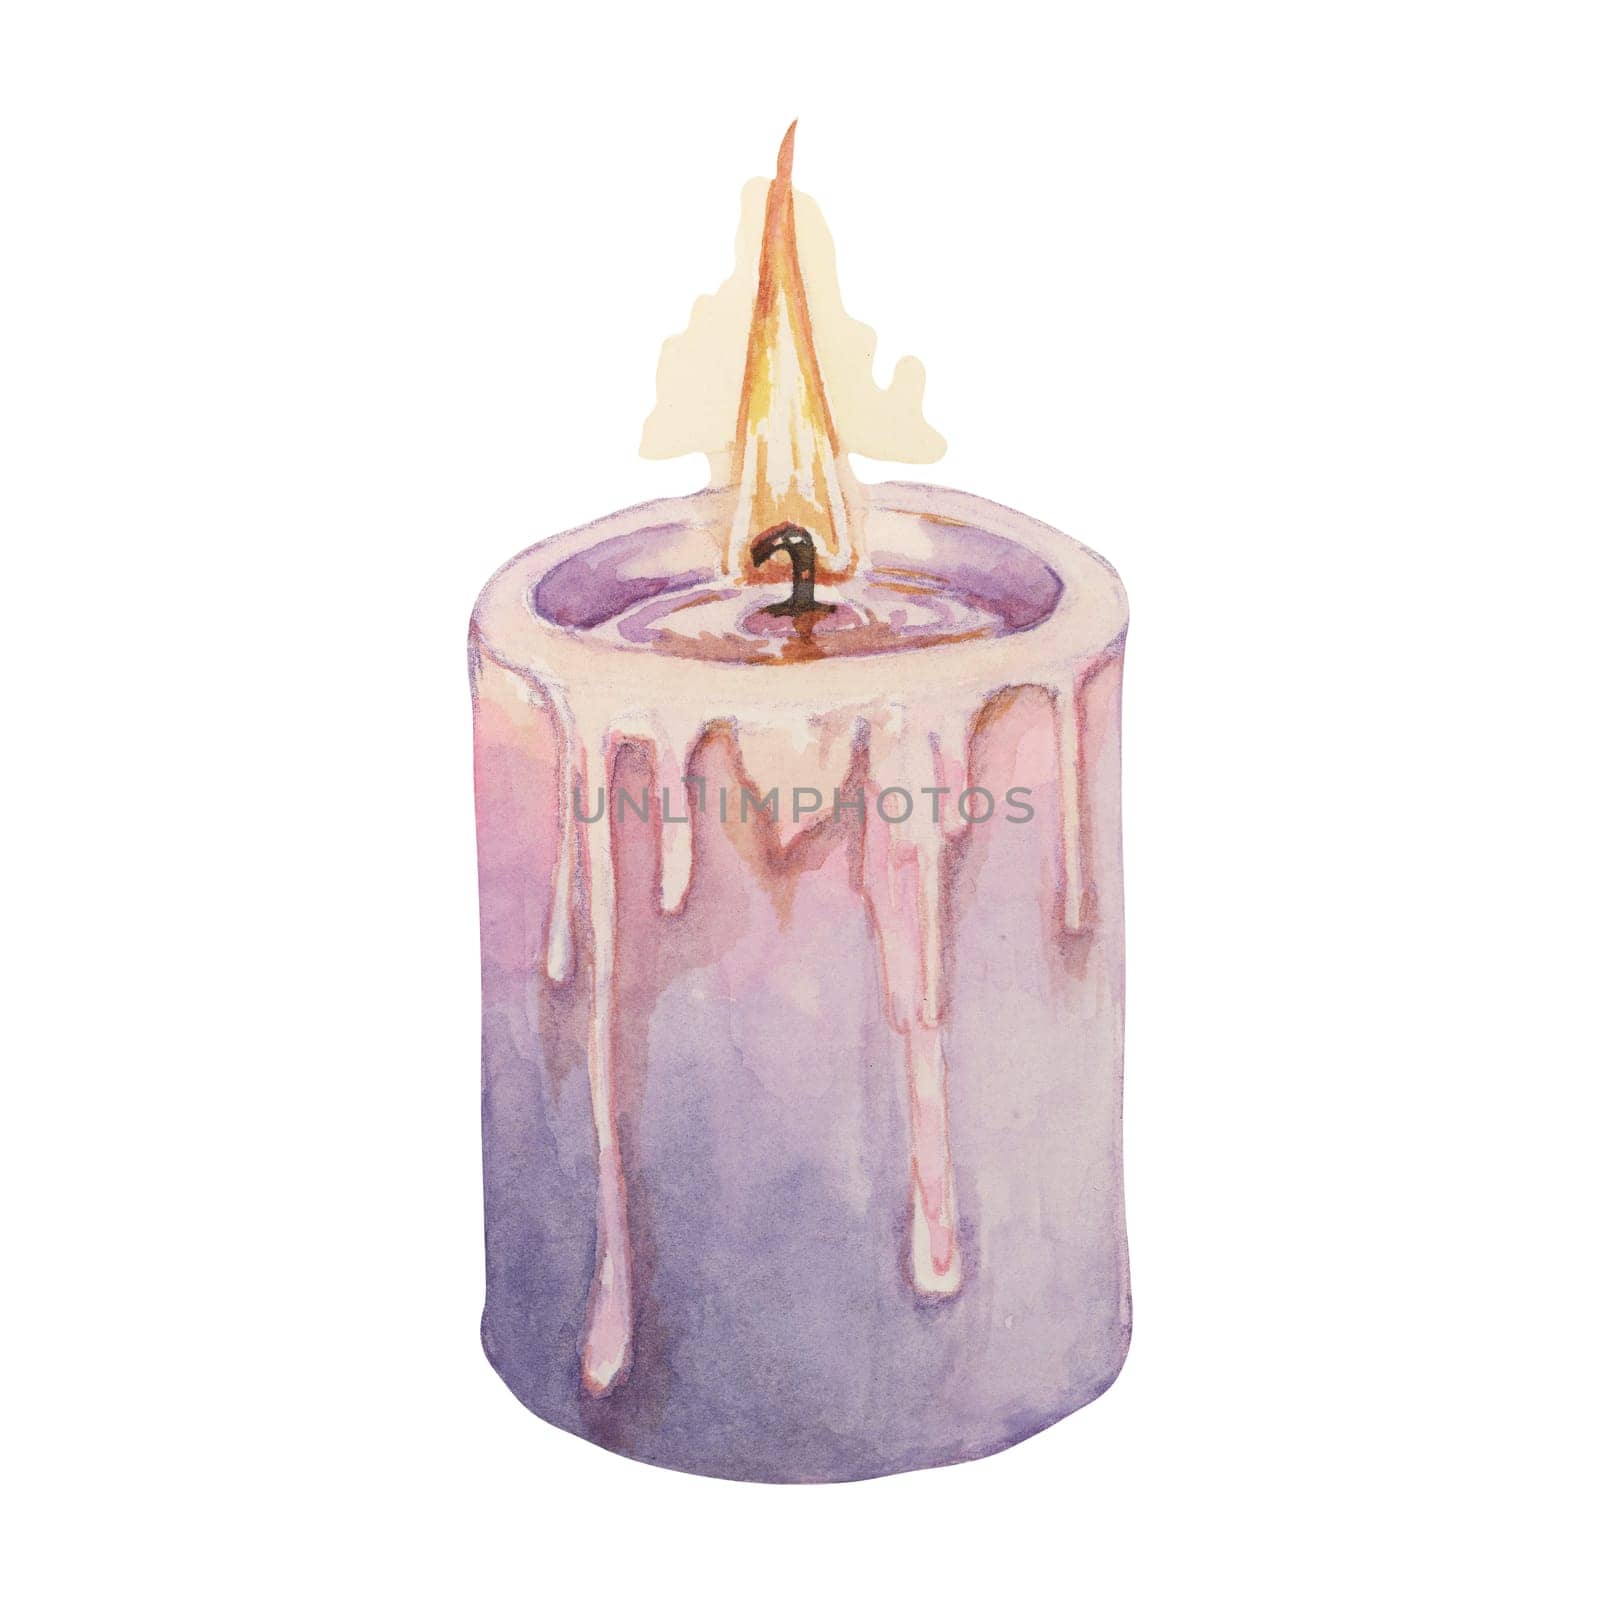 Lavender wax candle for home fragrance. Home spa aromatherapy watercolor illustration. Hand drawn clipart for beauty, cosmetics, wellness products by Fofito